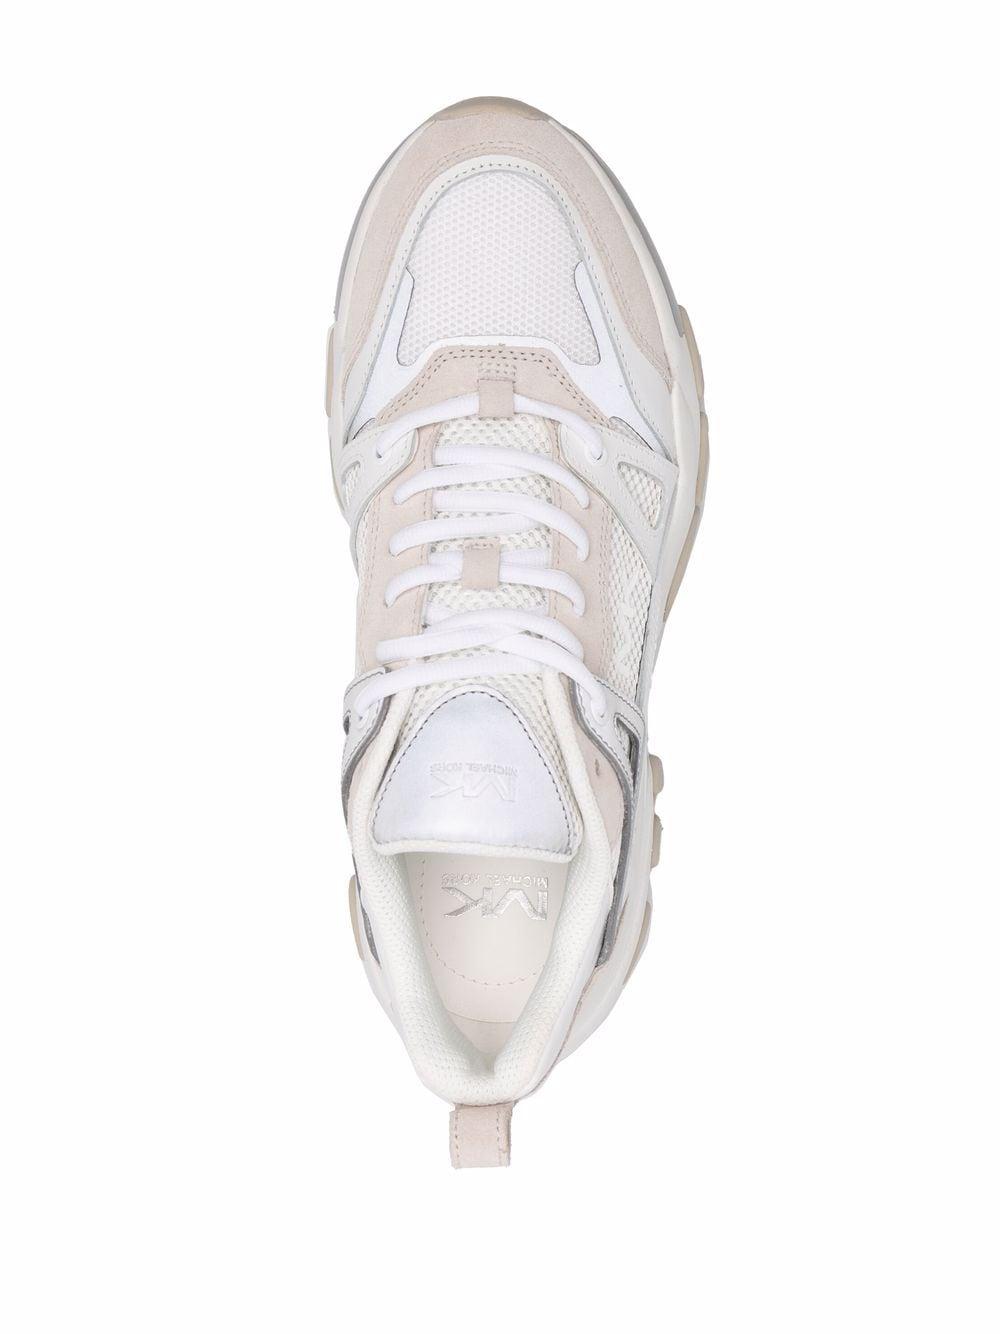 Michael Kors Leather Nick Panelled Chunky Sneakers in White for Men | Lyst